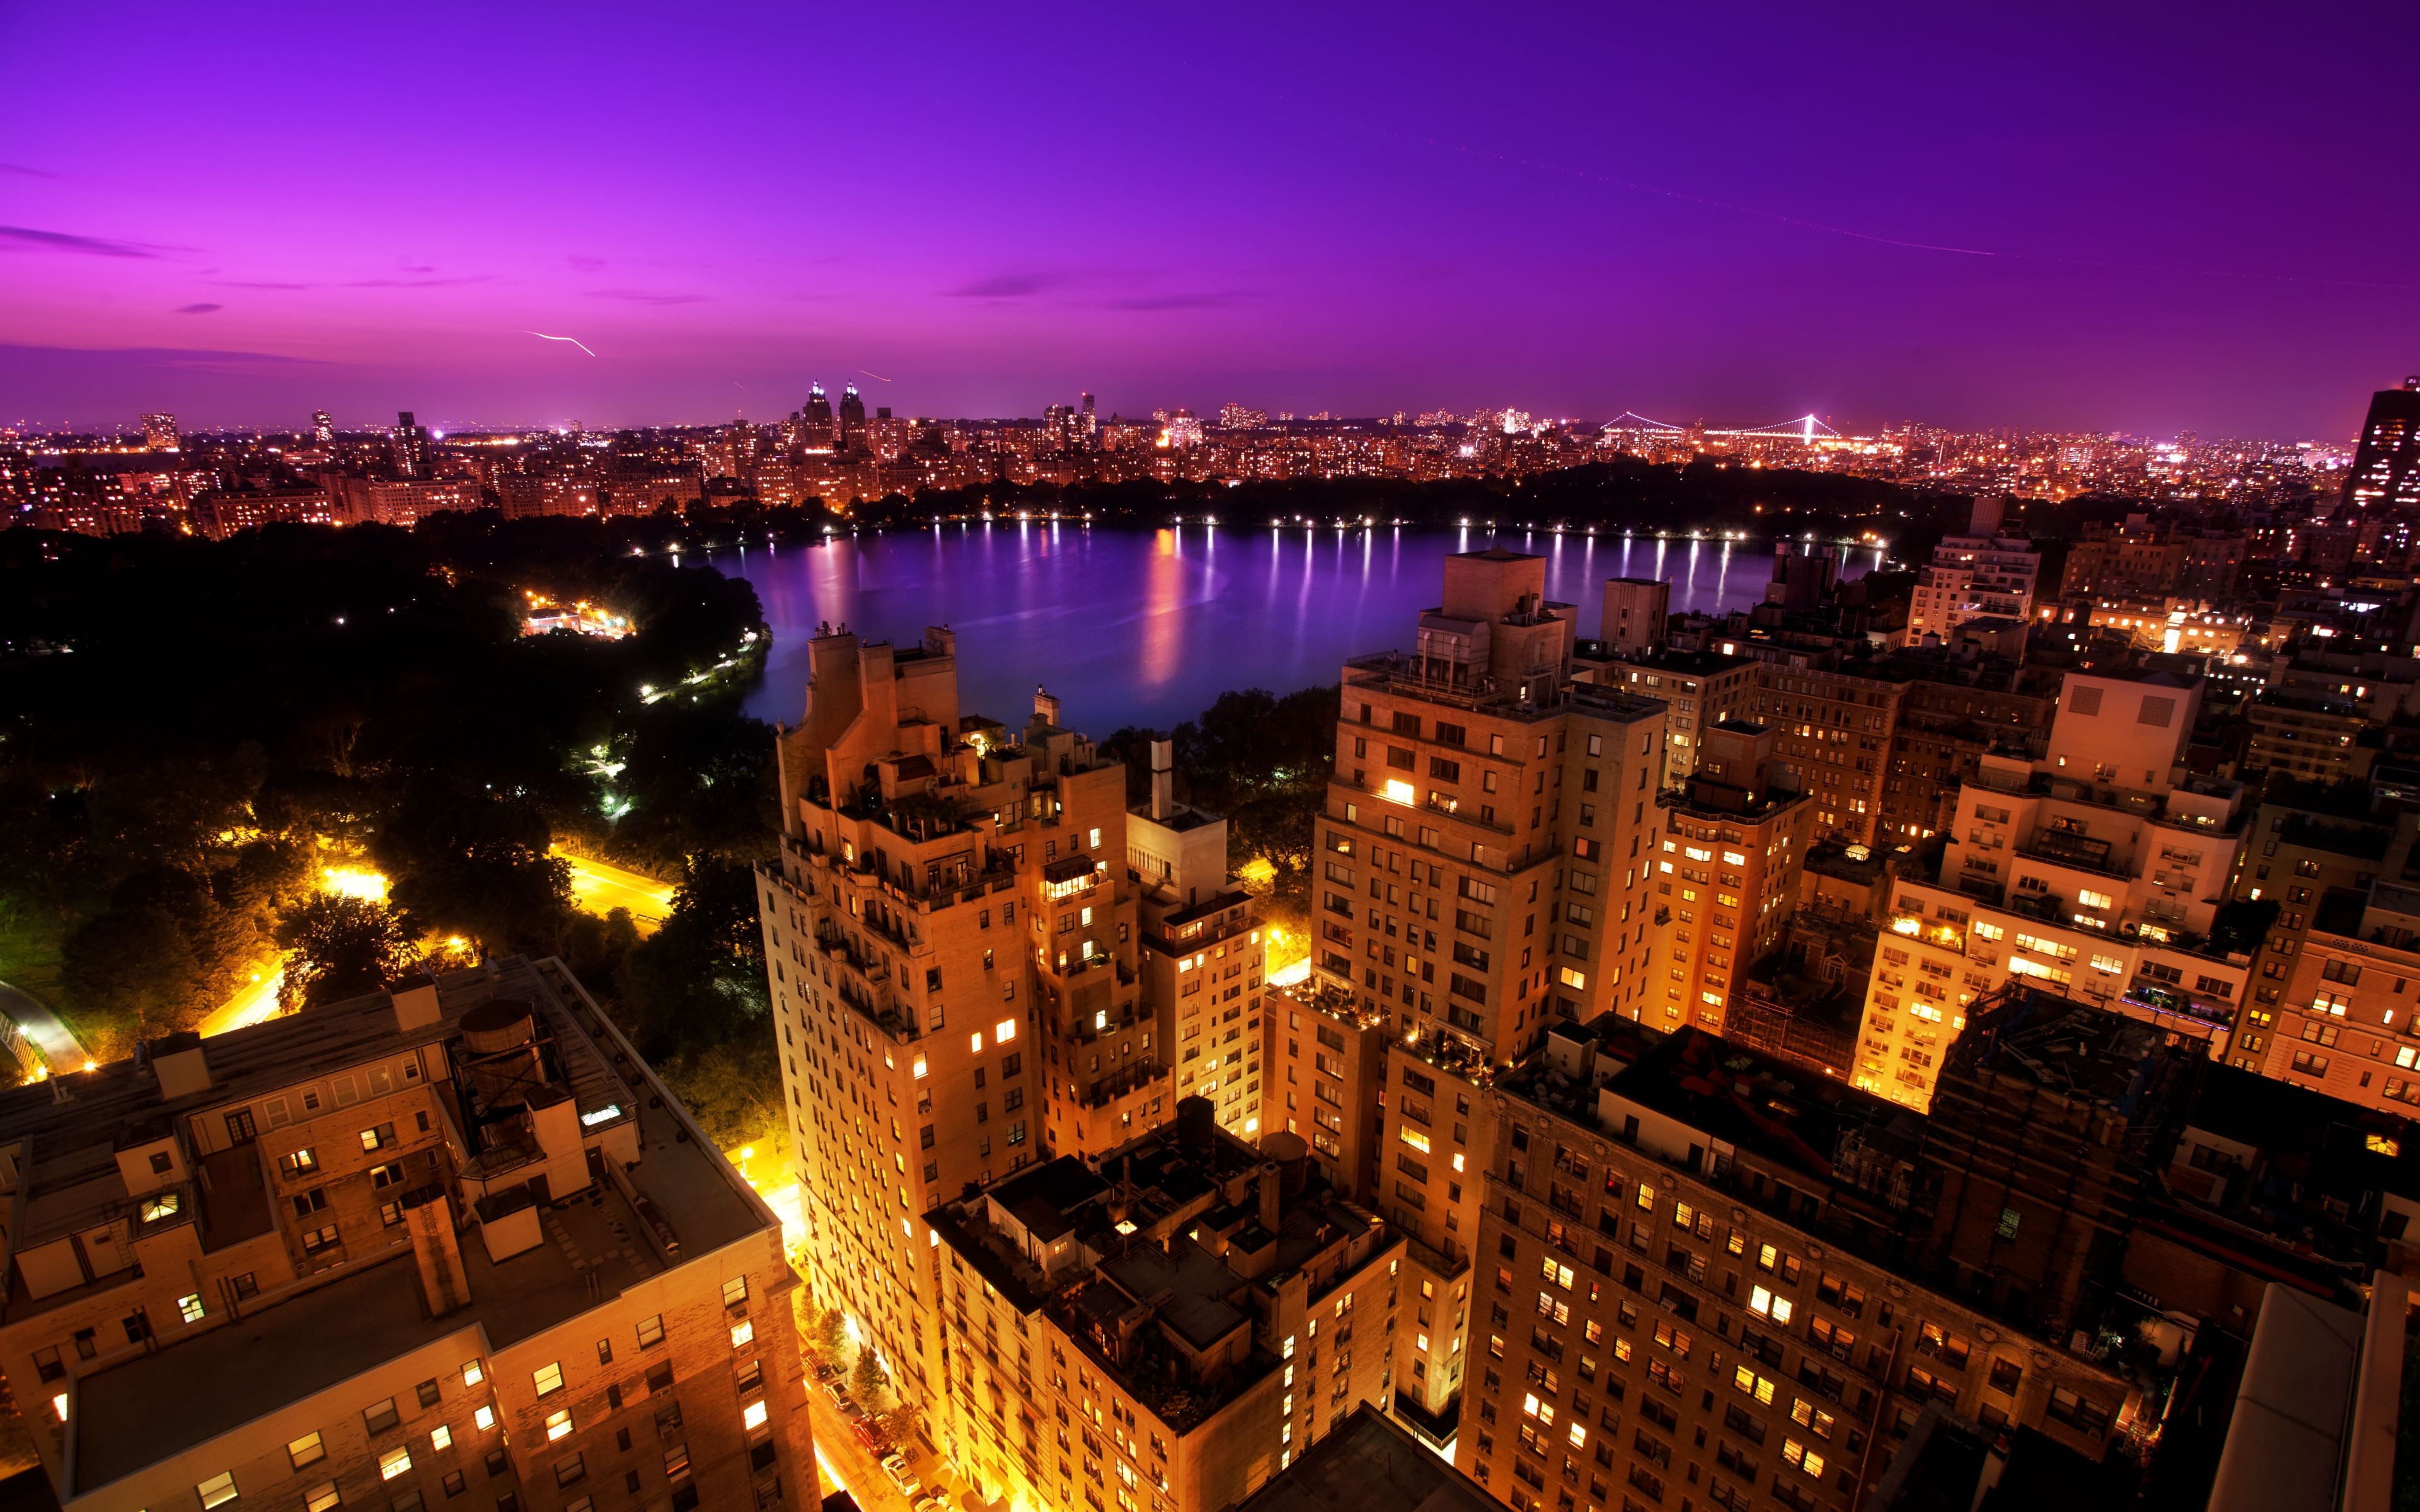 Urban Lake', United States, New York City, Upper East Side, Central